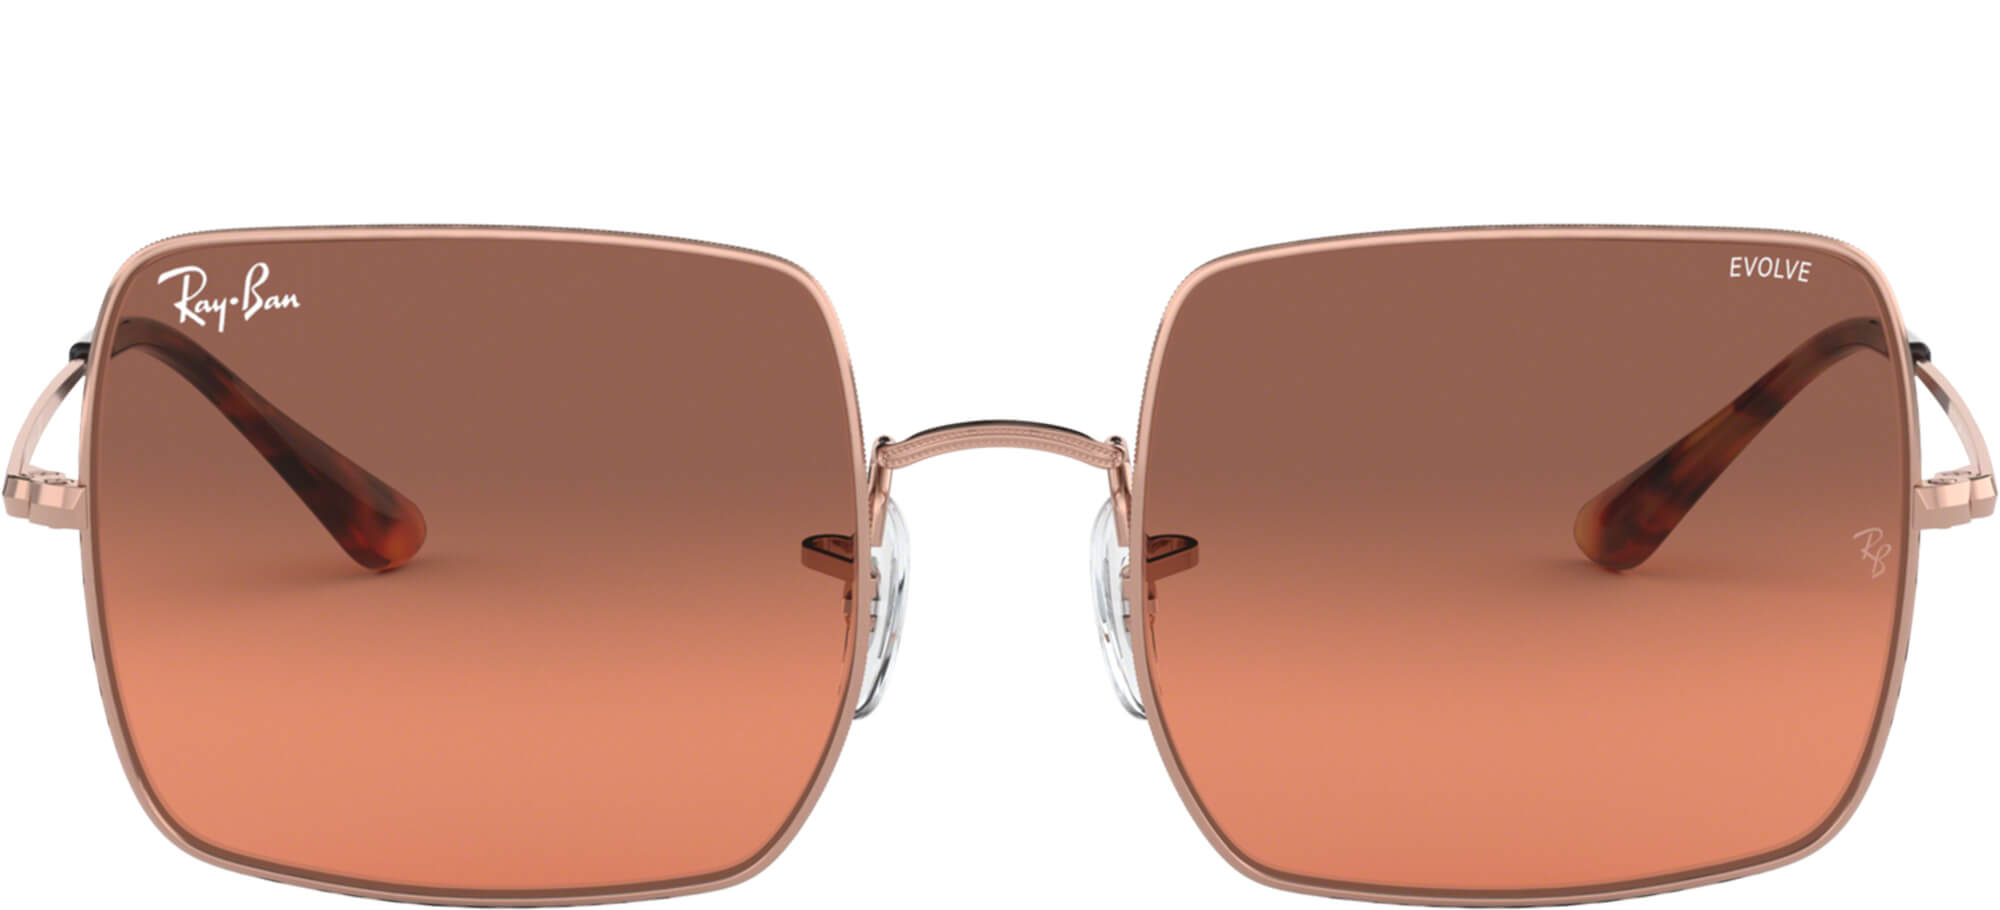 Ray-BanSQUARE RB 1971 EVOLVE LENSESRose Gold/burgundy Red Shaded (9151/AA)